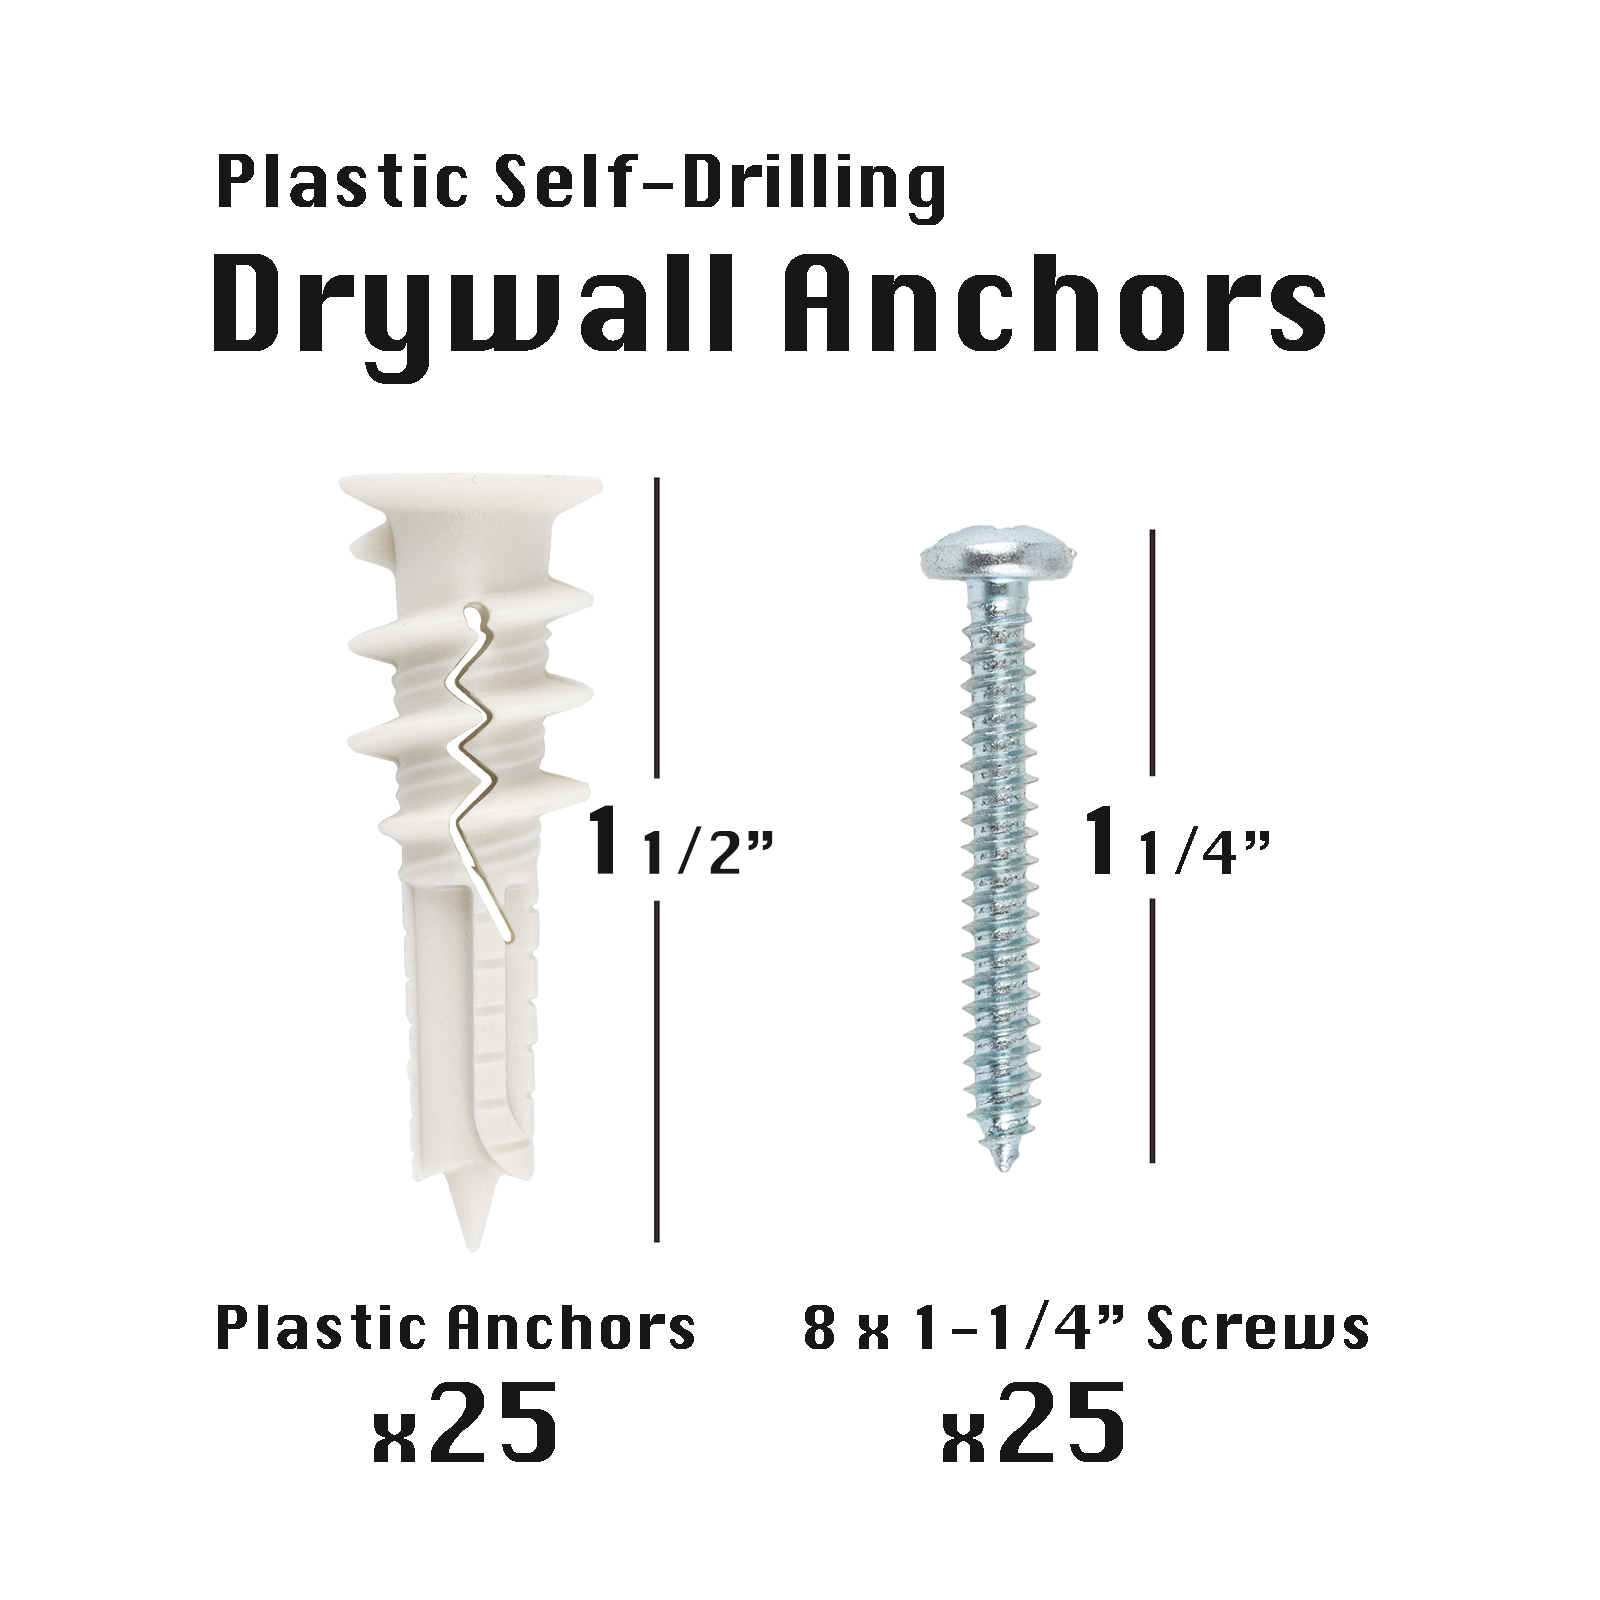 20PCS Self Drilling Anchors Screws Drywall Self-Drilling Anchors Expansion Set,Carbon Steel Hollow Wall Anchor Tapping Screw with Screws Kit,Suitable for Wall Insulation Board Shelf Straps